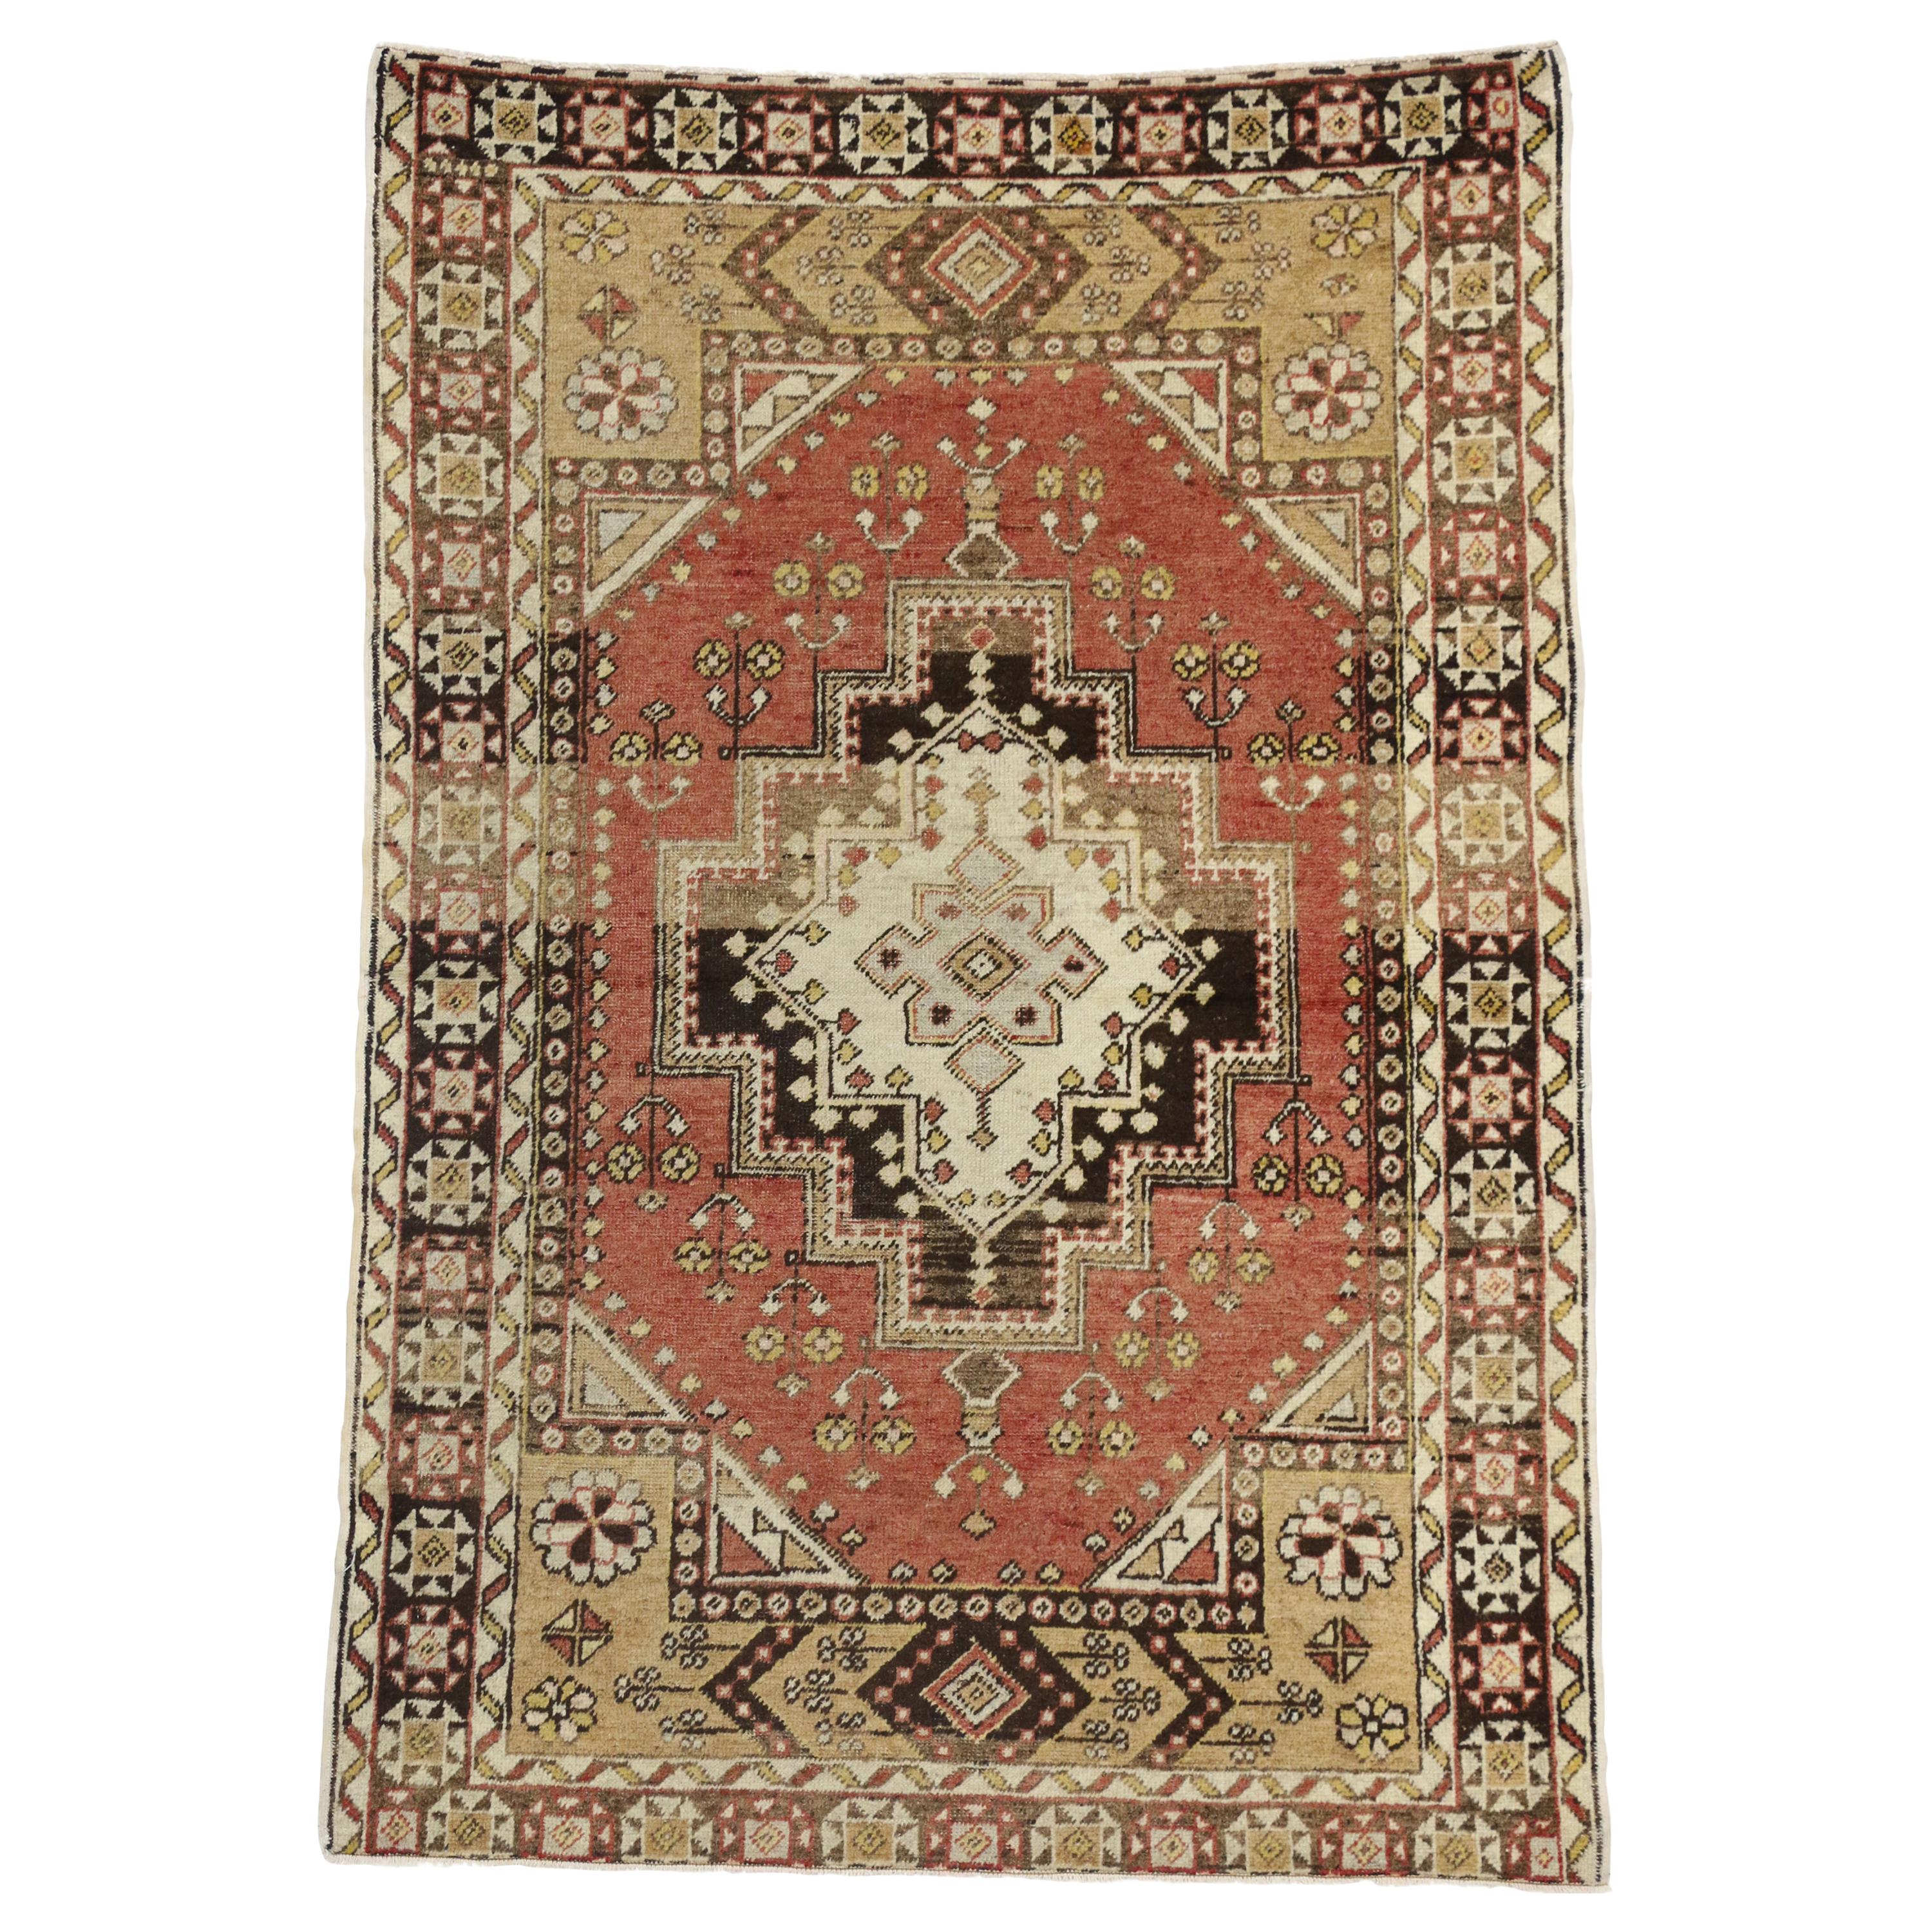 Rustic Lodge Style Vintage Turkish Oushak Accent Rug, Entry or Foyer Rug